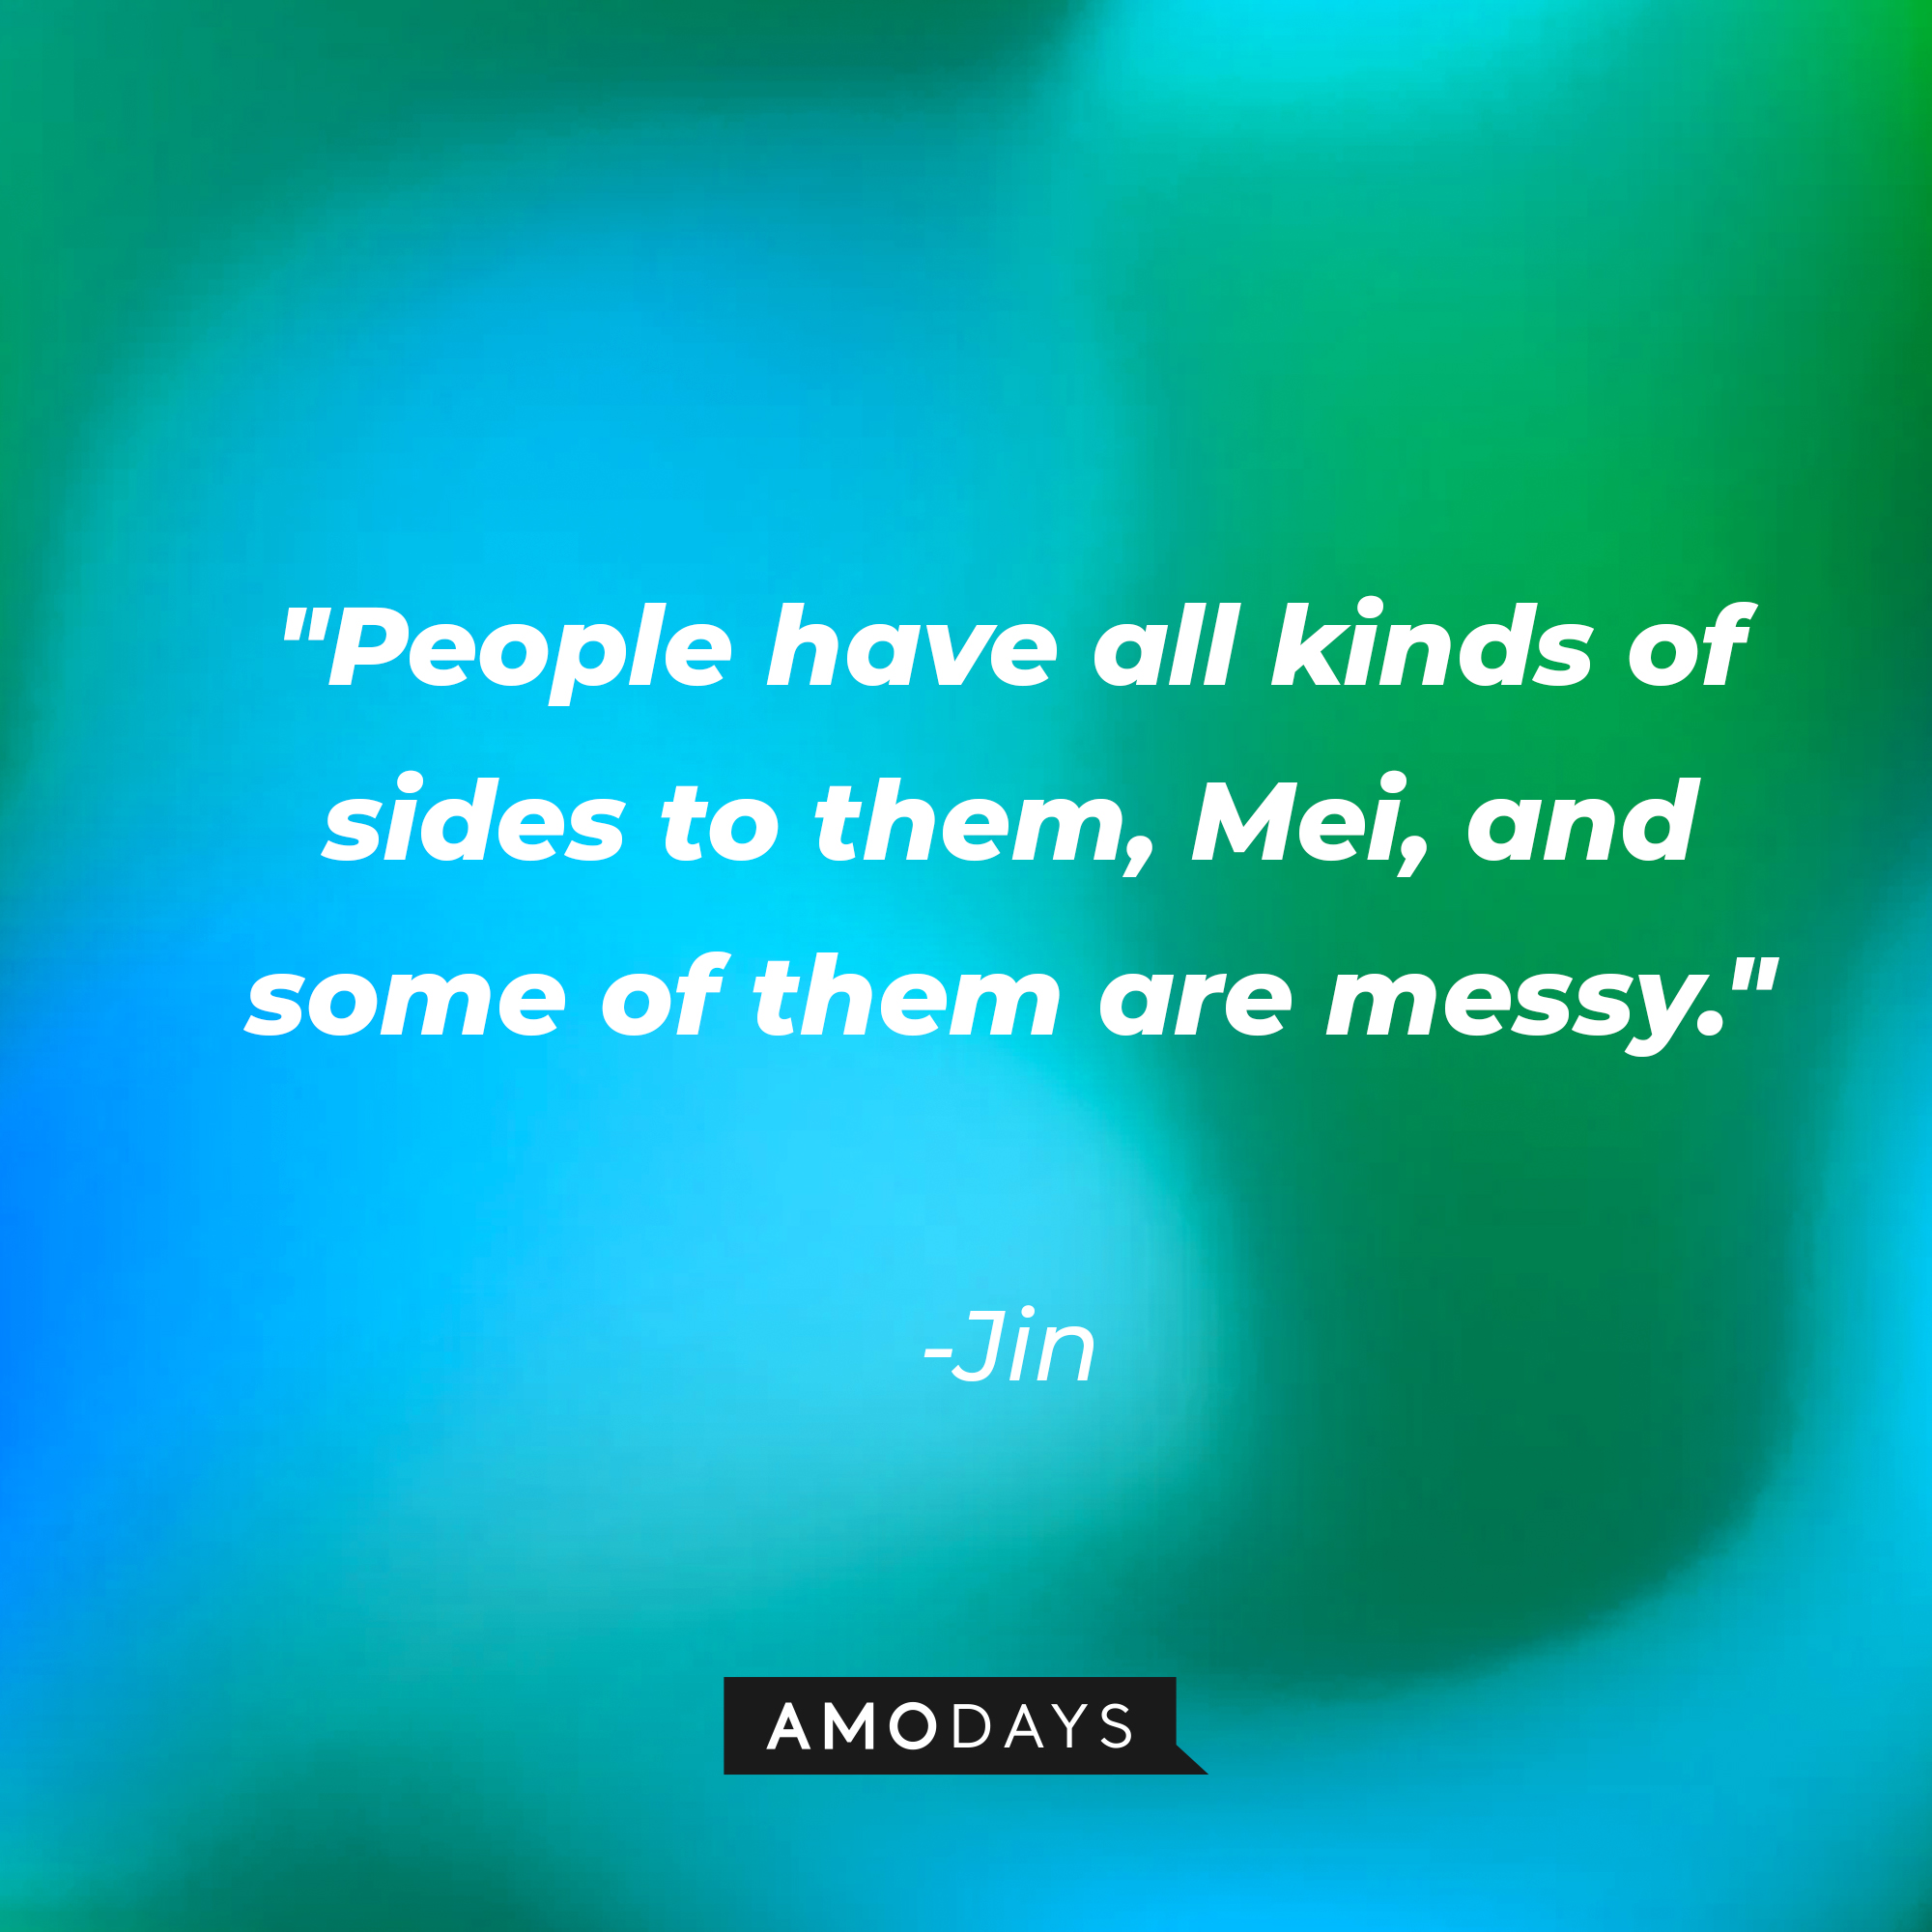 Jin's quote: "People have all kinds of sides to them, Mei, and some of them are messy." | Source: AmoDays